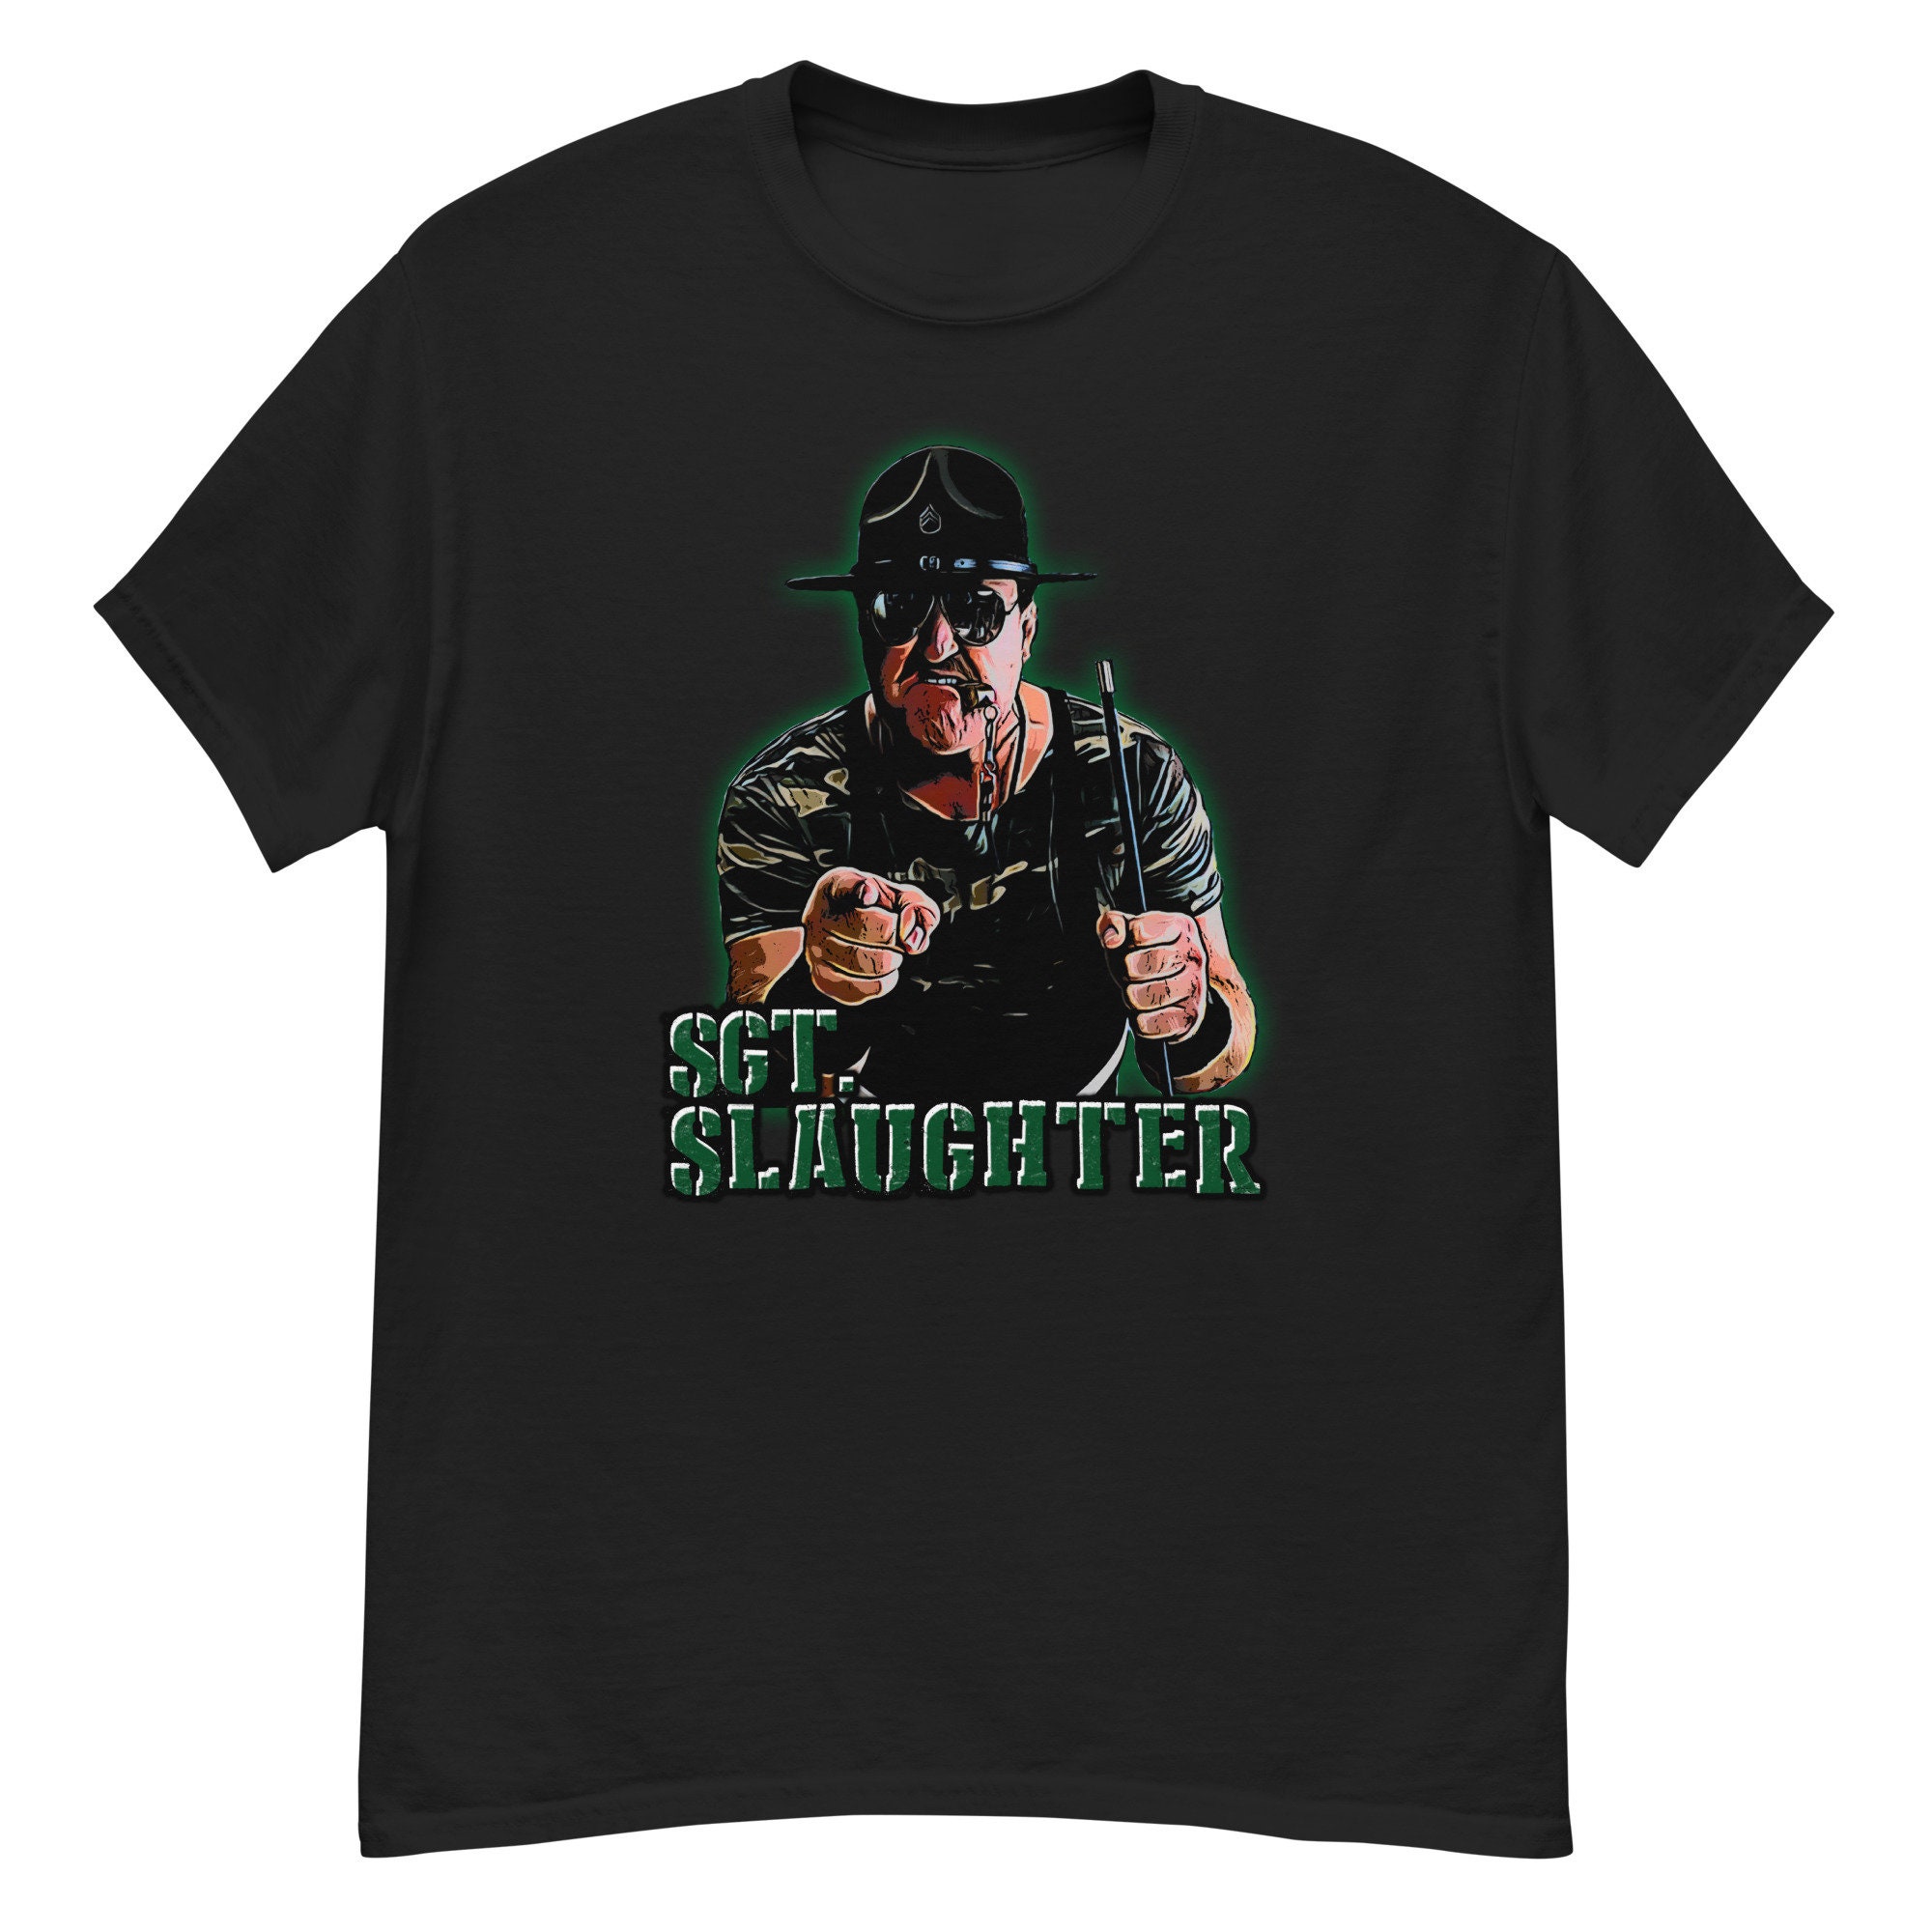 Discover sgt slaughter wrestling tshirt 80s tee